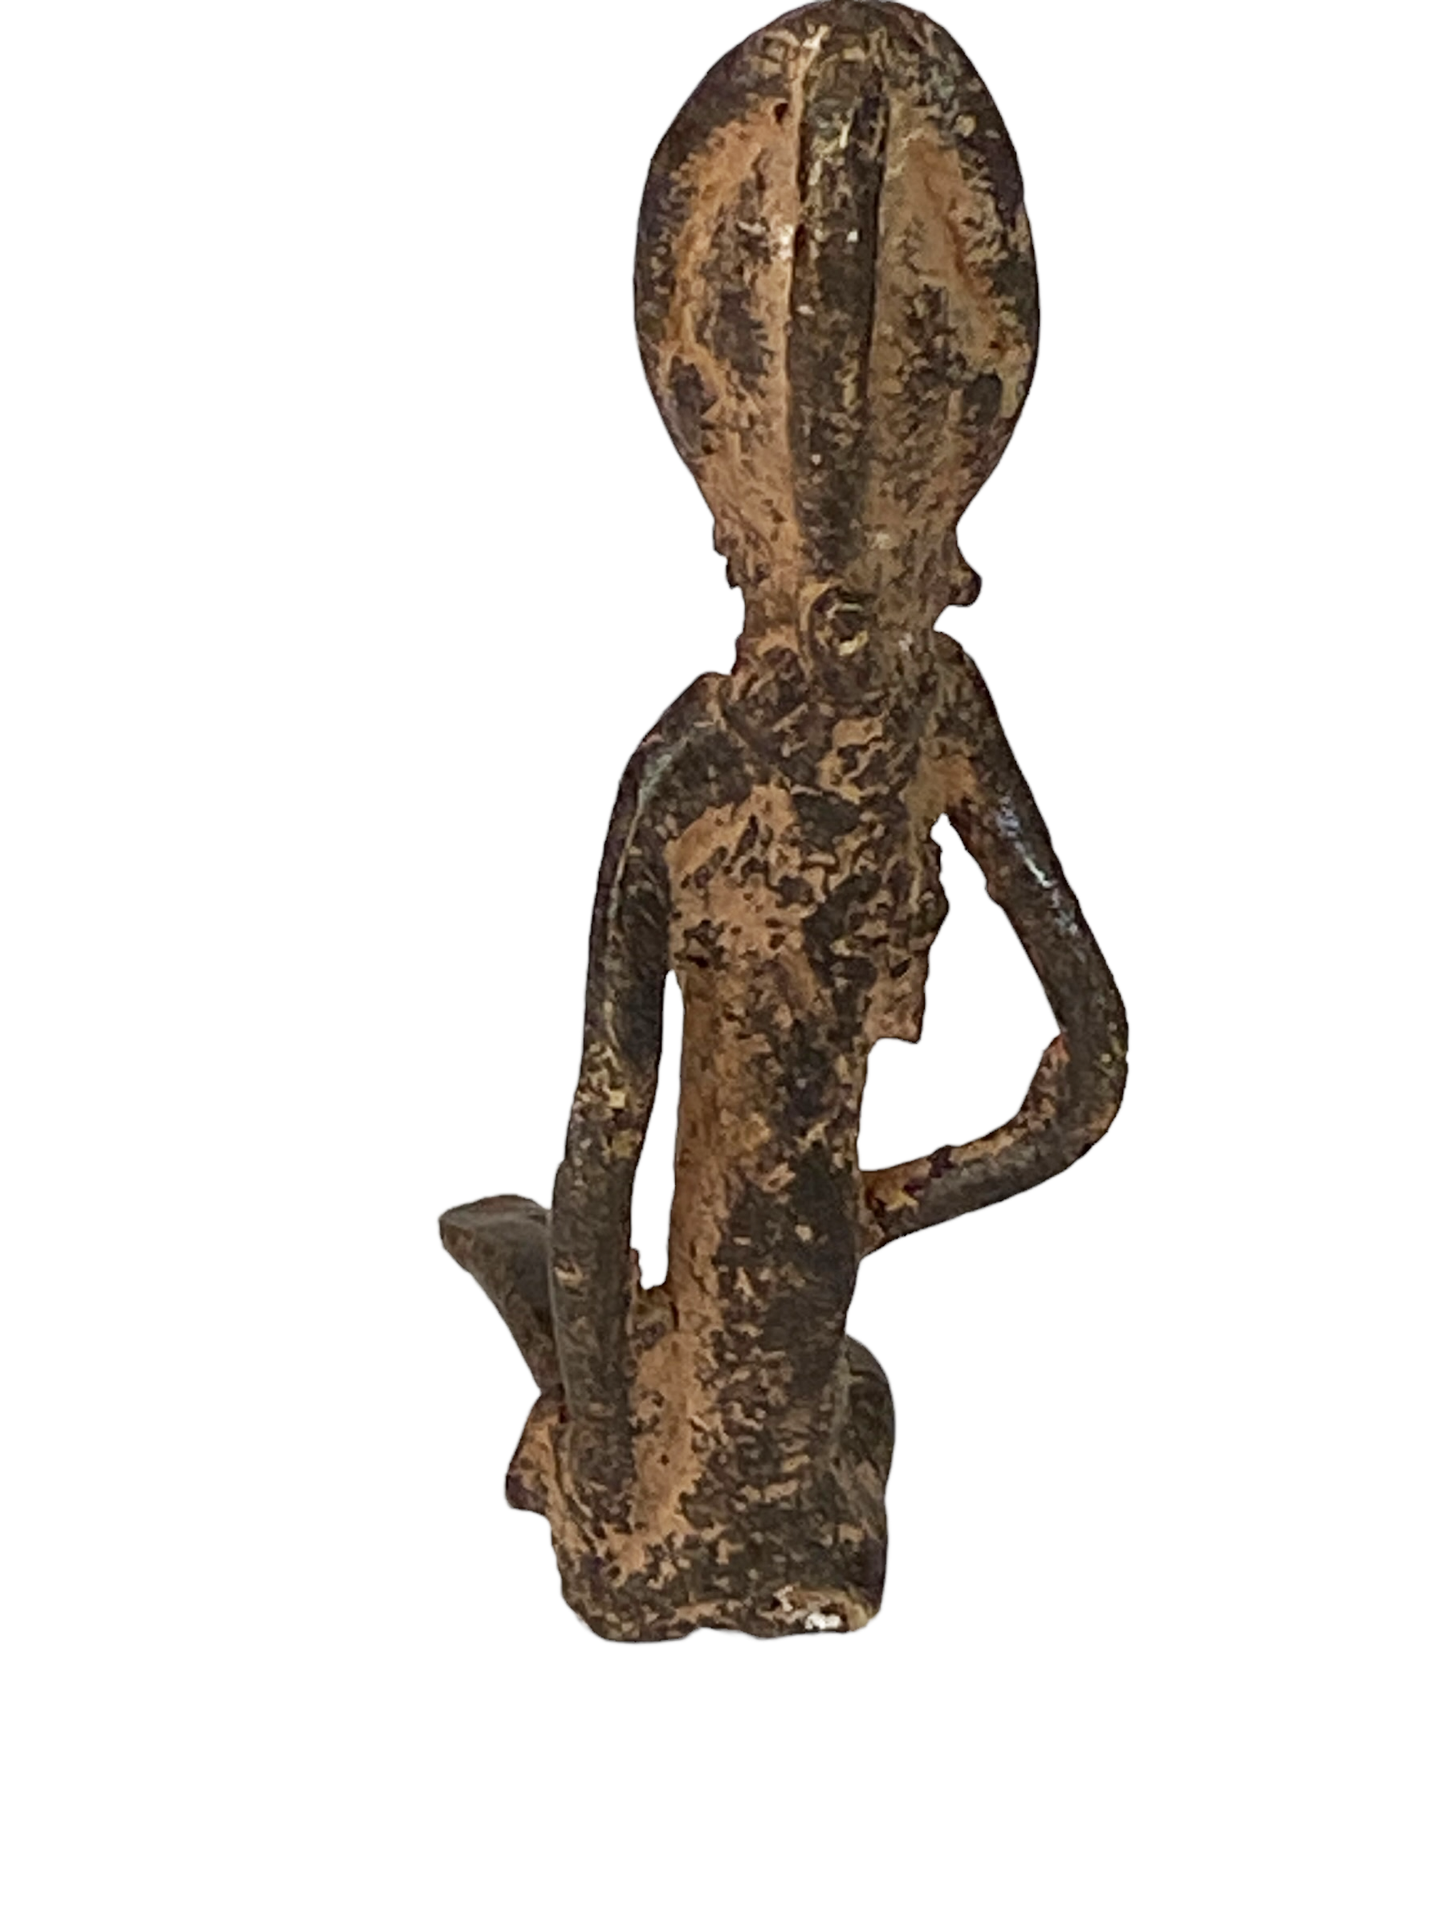 # 4929 African Old Dogon Bronze Figure of a Seating female Mali 3.5" h